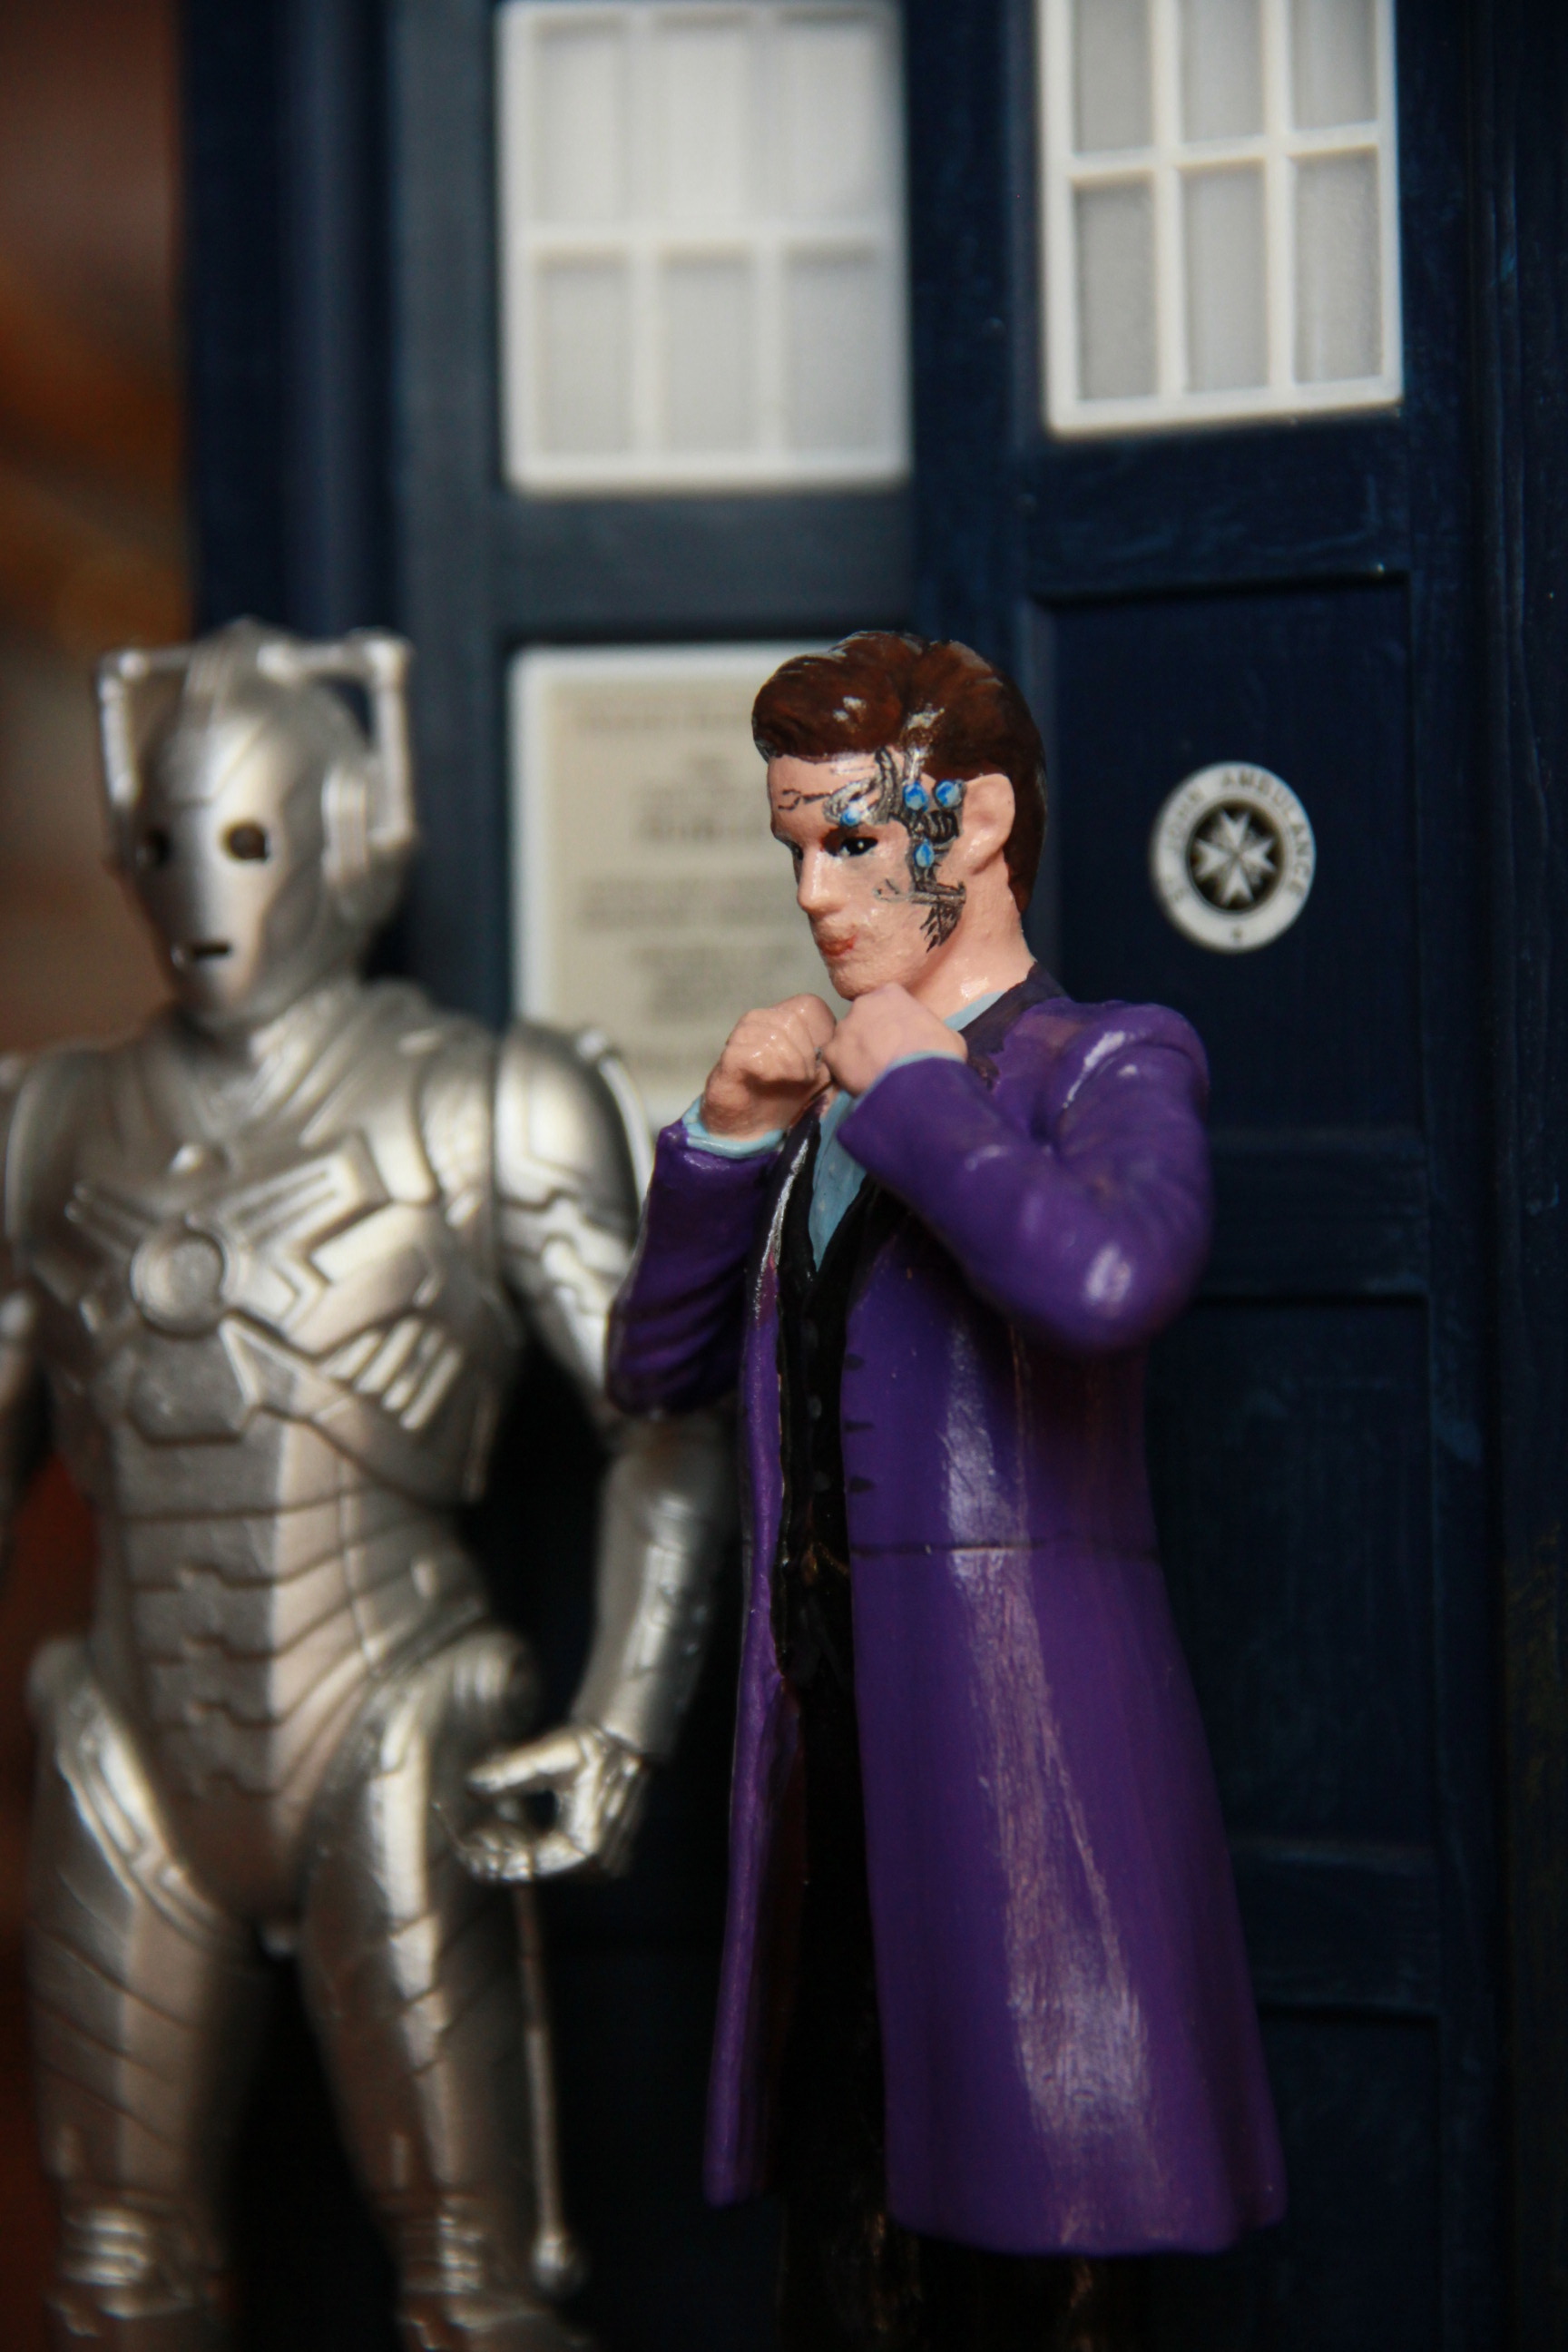 Mr. Clever and Cyberman